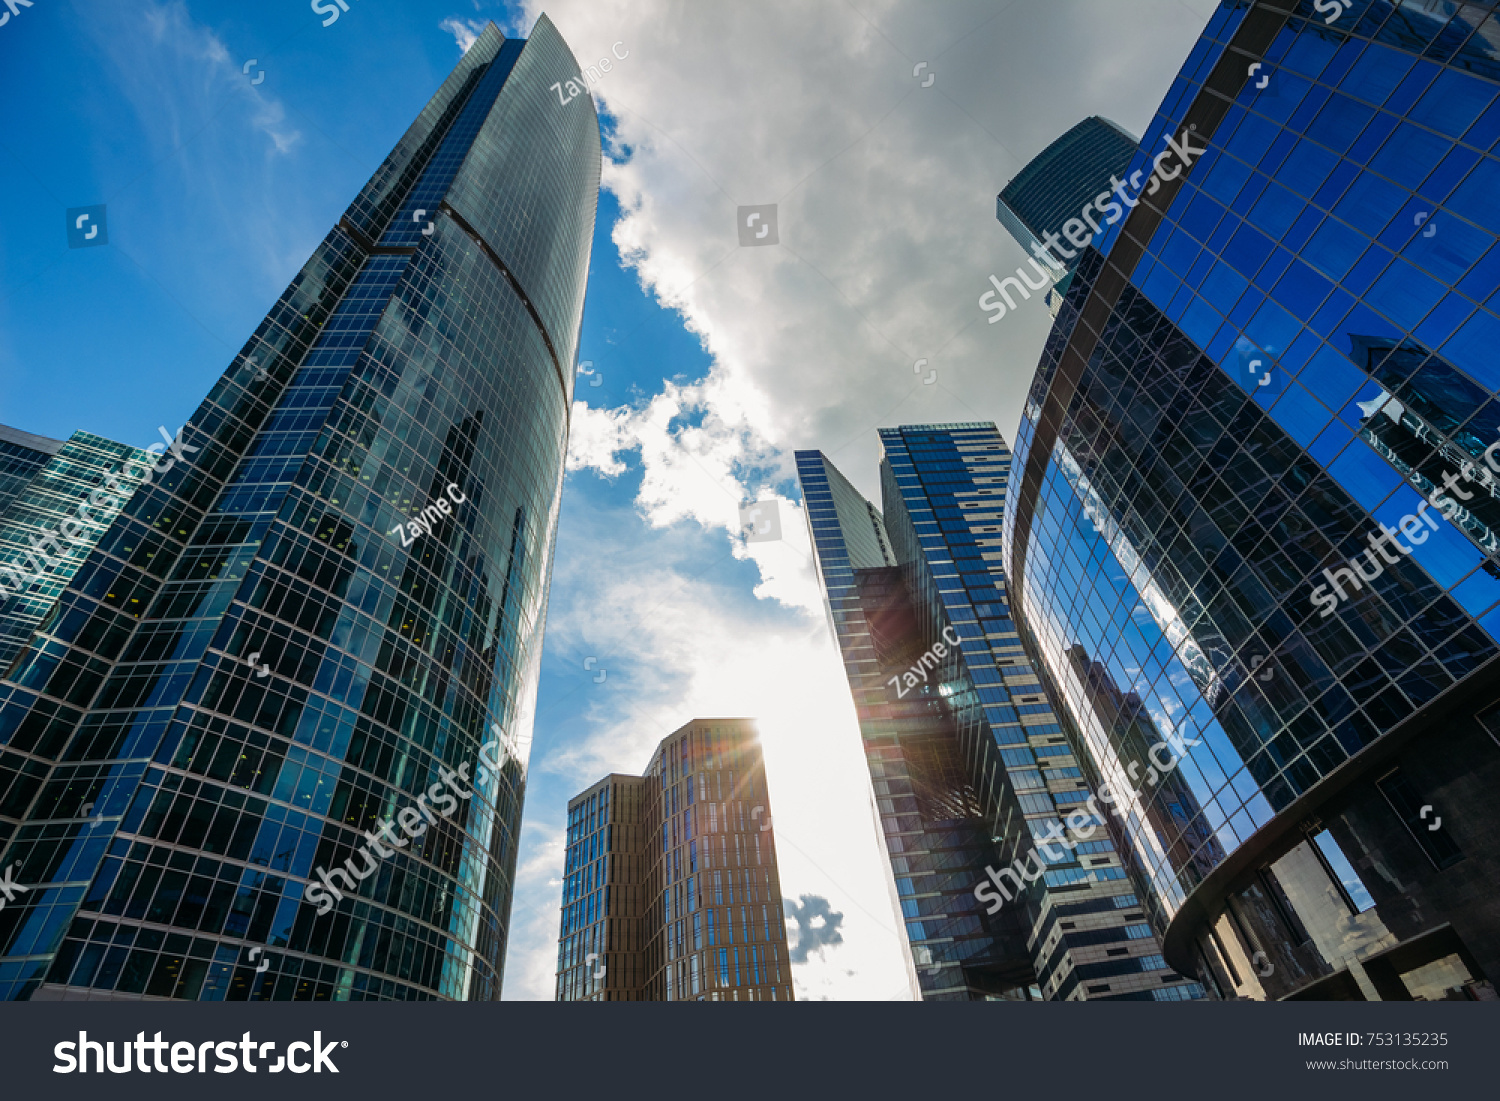 Moscow-city business center against the blue sky with the sun before sunset #753135235